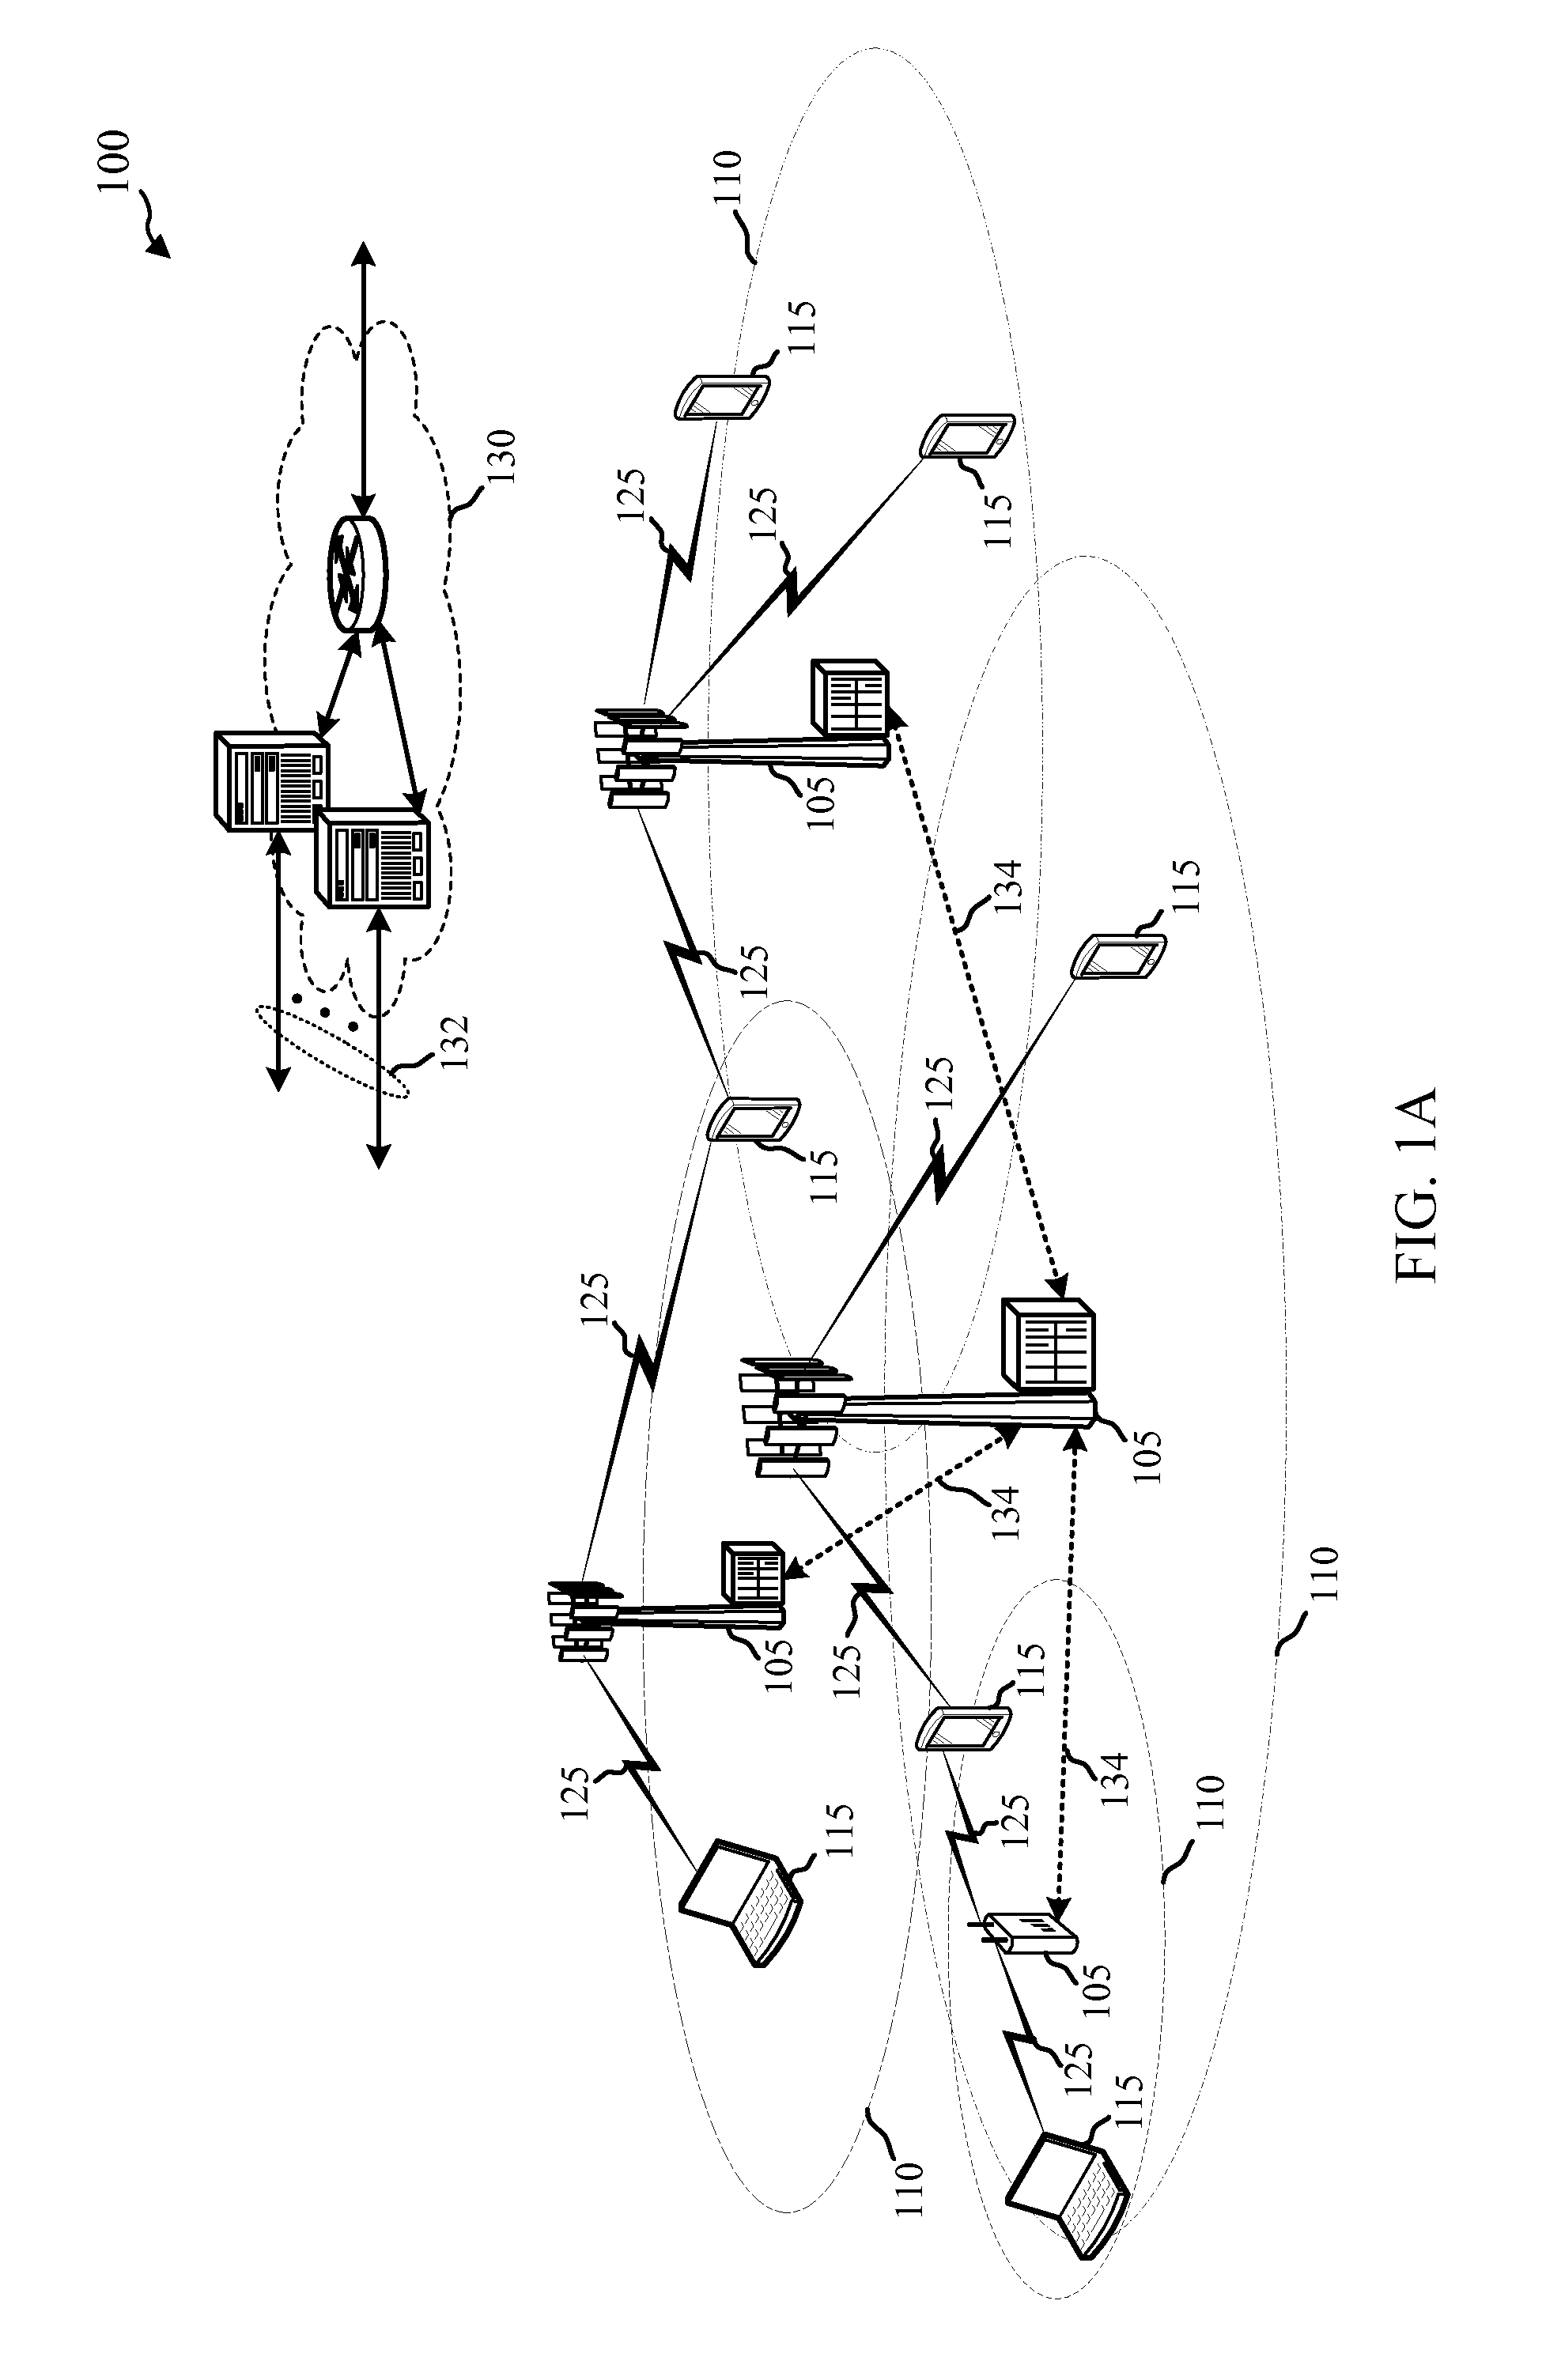 Channel feedback for non-orthogonal multiple access systems